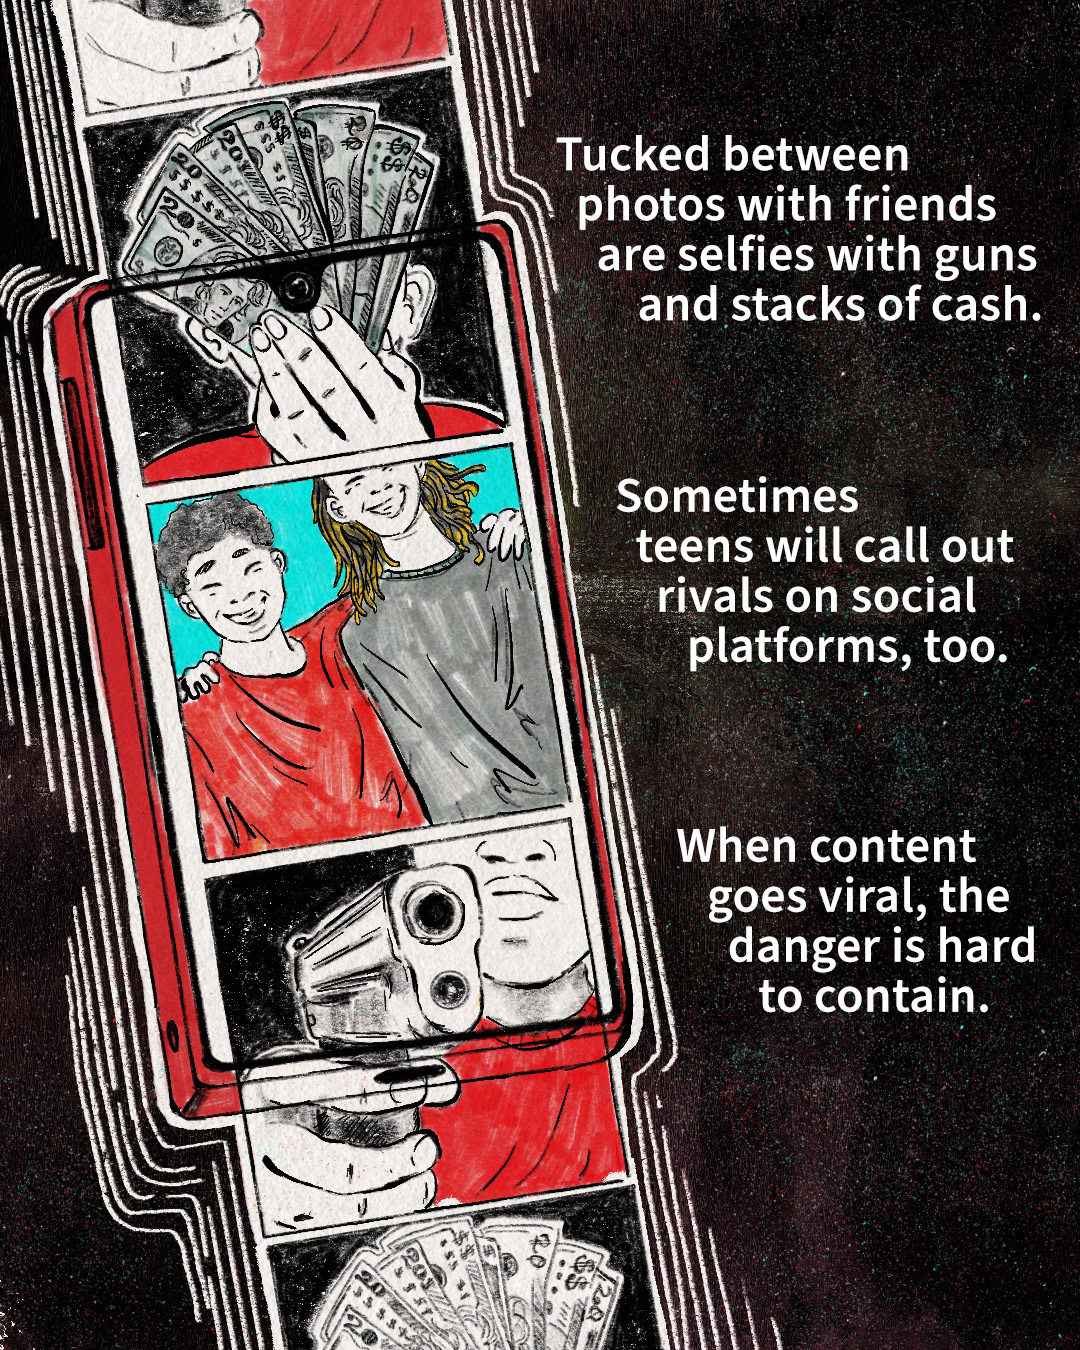 A smartphone shows three images repeating on its screen: a teen holding a fan of money over their face, two teens smiling with their arms around each other, and a teen holding a gun pointed toward the camera. Beside the phone, text reads; “Tucked between photos with friends are selfies with guns and stacks of cash. Sometimes teens will call out rivals on social platforms, too. When content goes viral, the danger is hard to contain.”